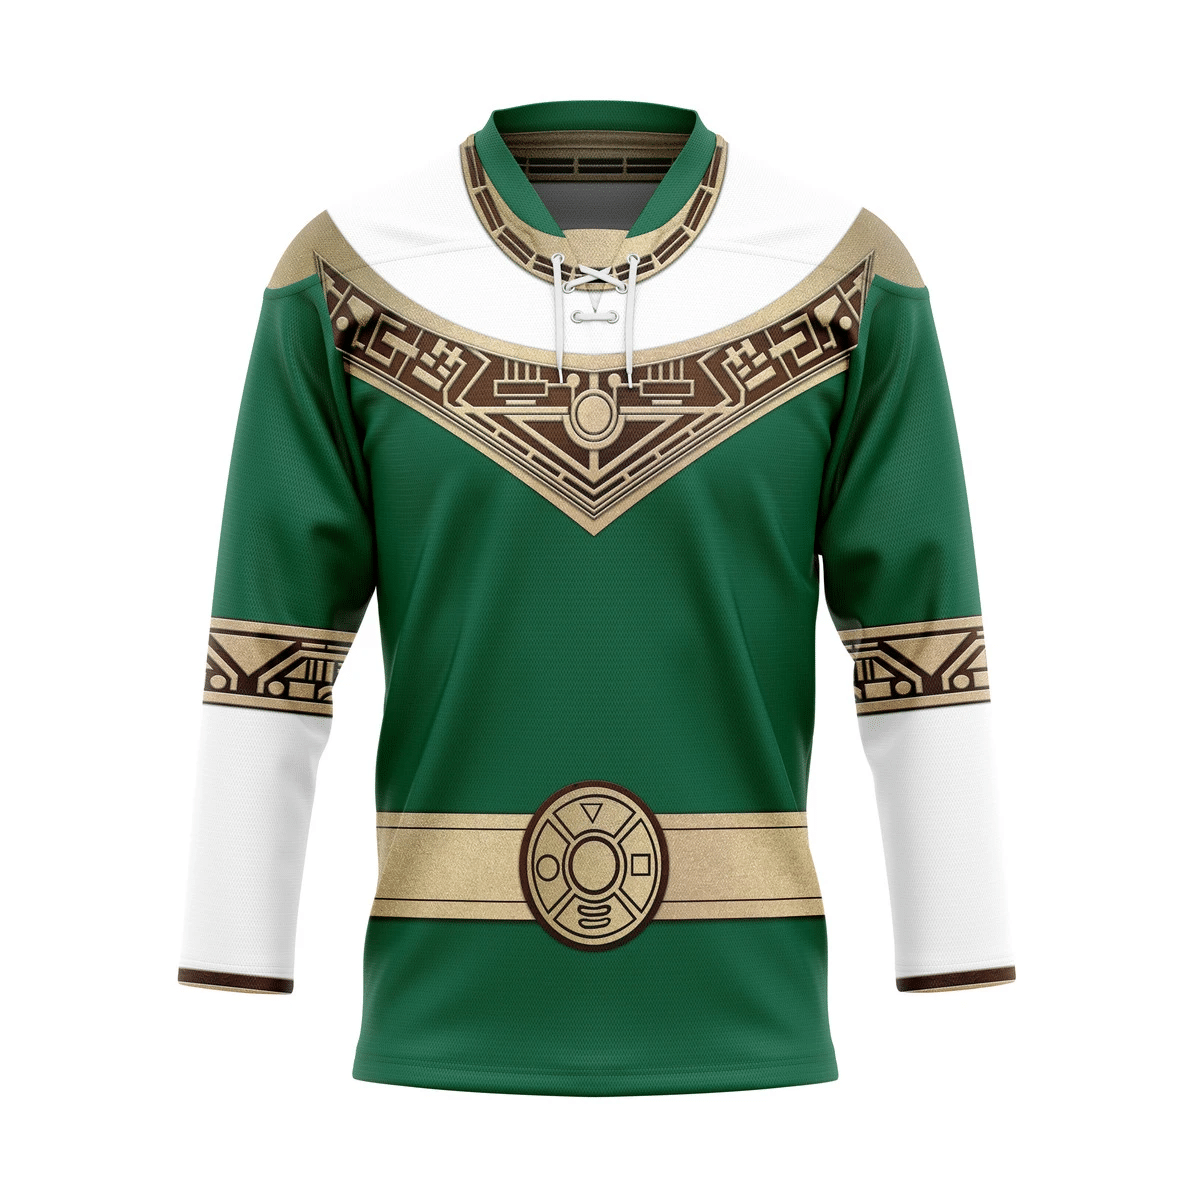 The style of a hockey jersey should match your personality. 159